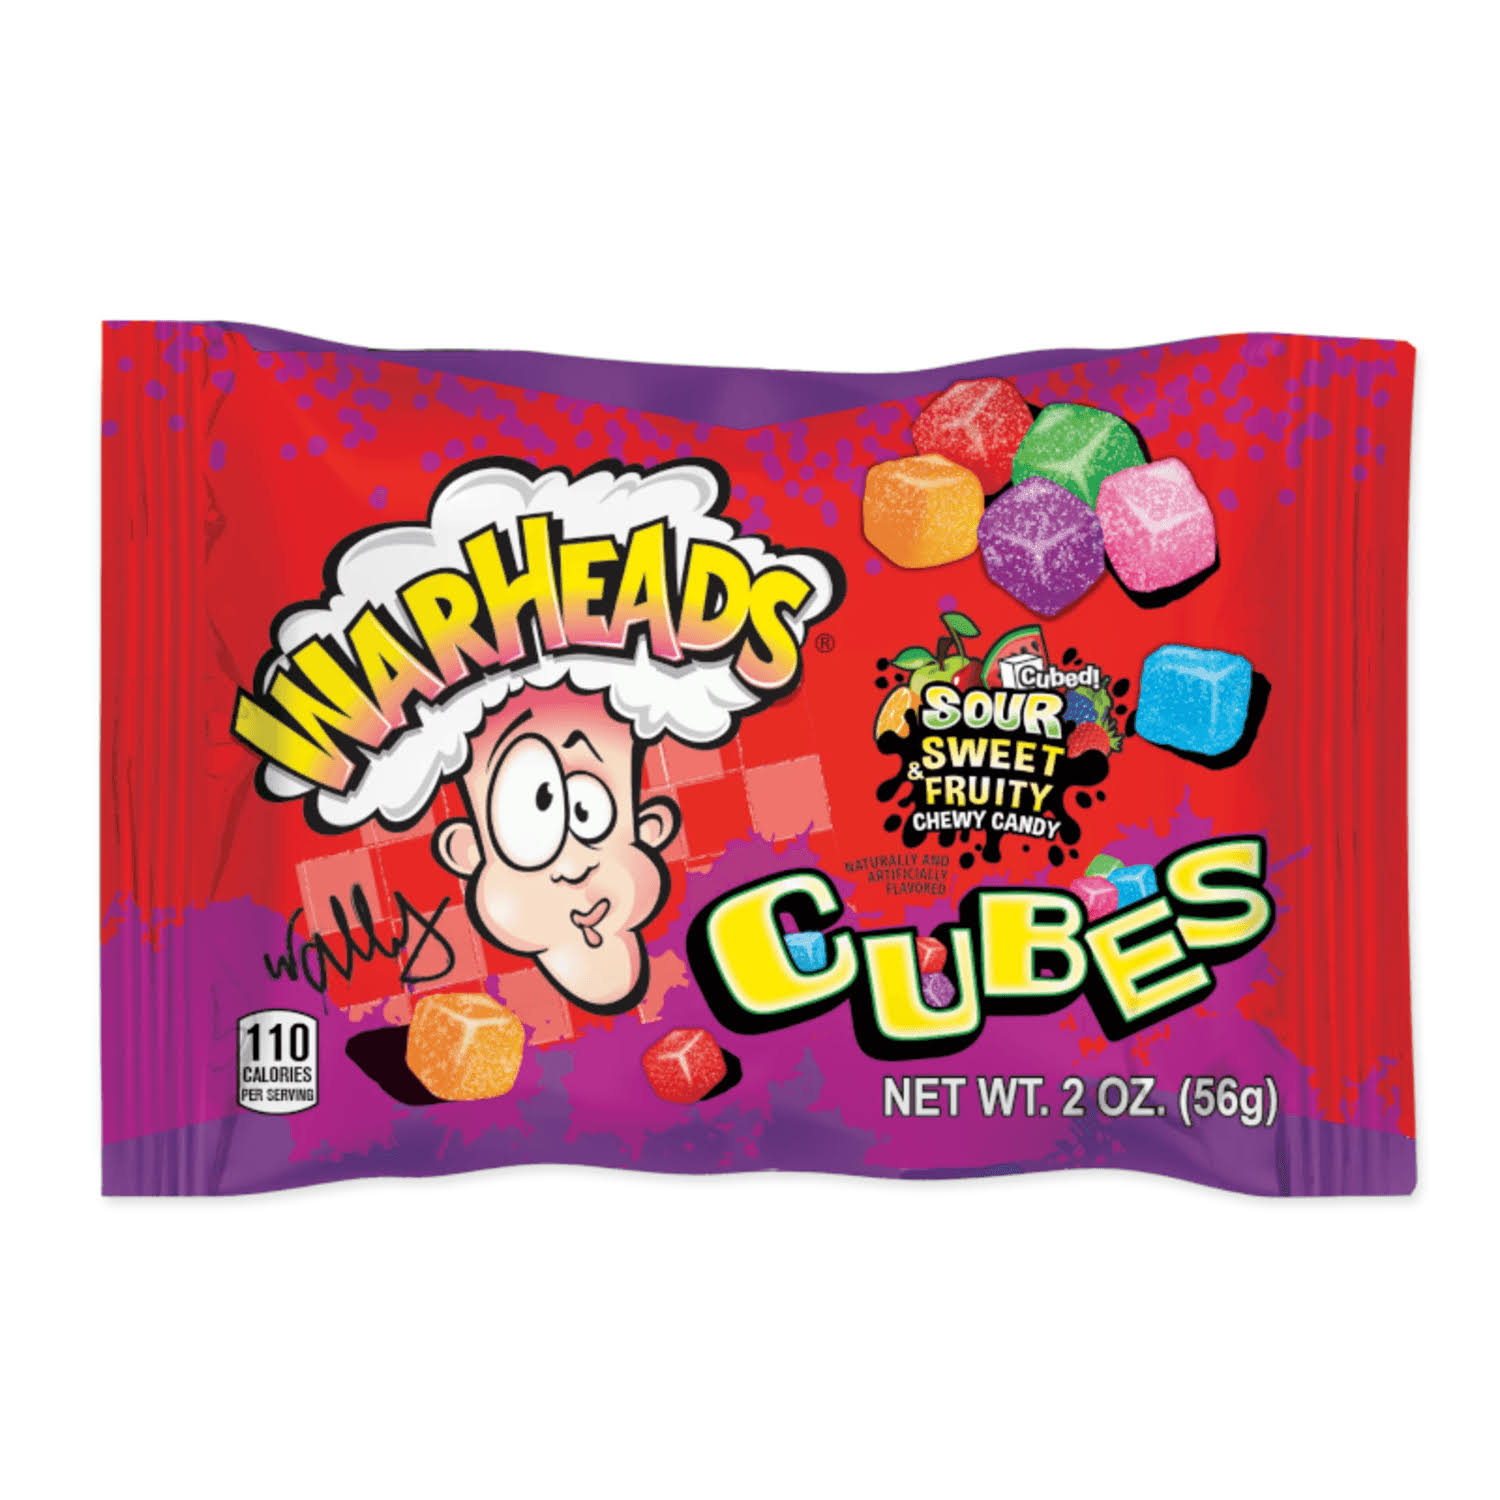 Warheads Chewy Cubes - 2oz (56g)